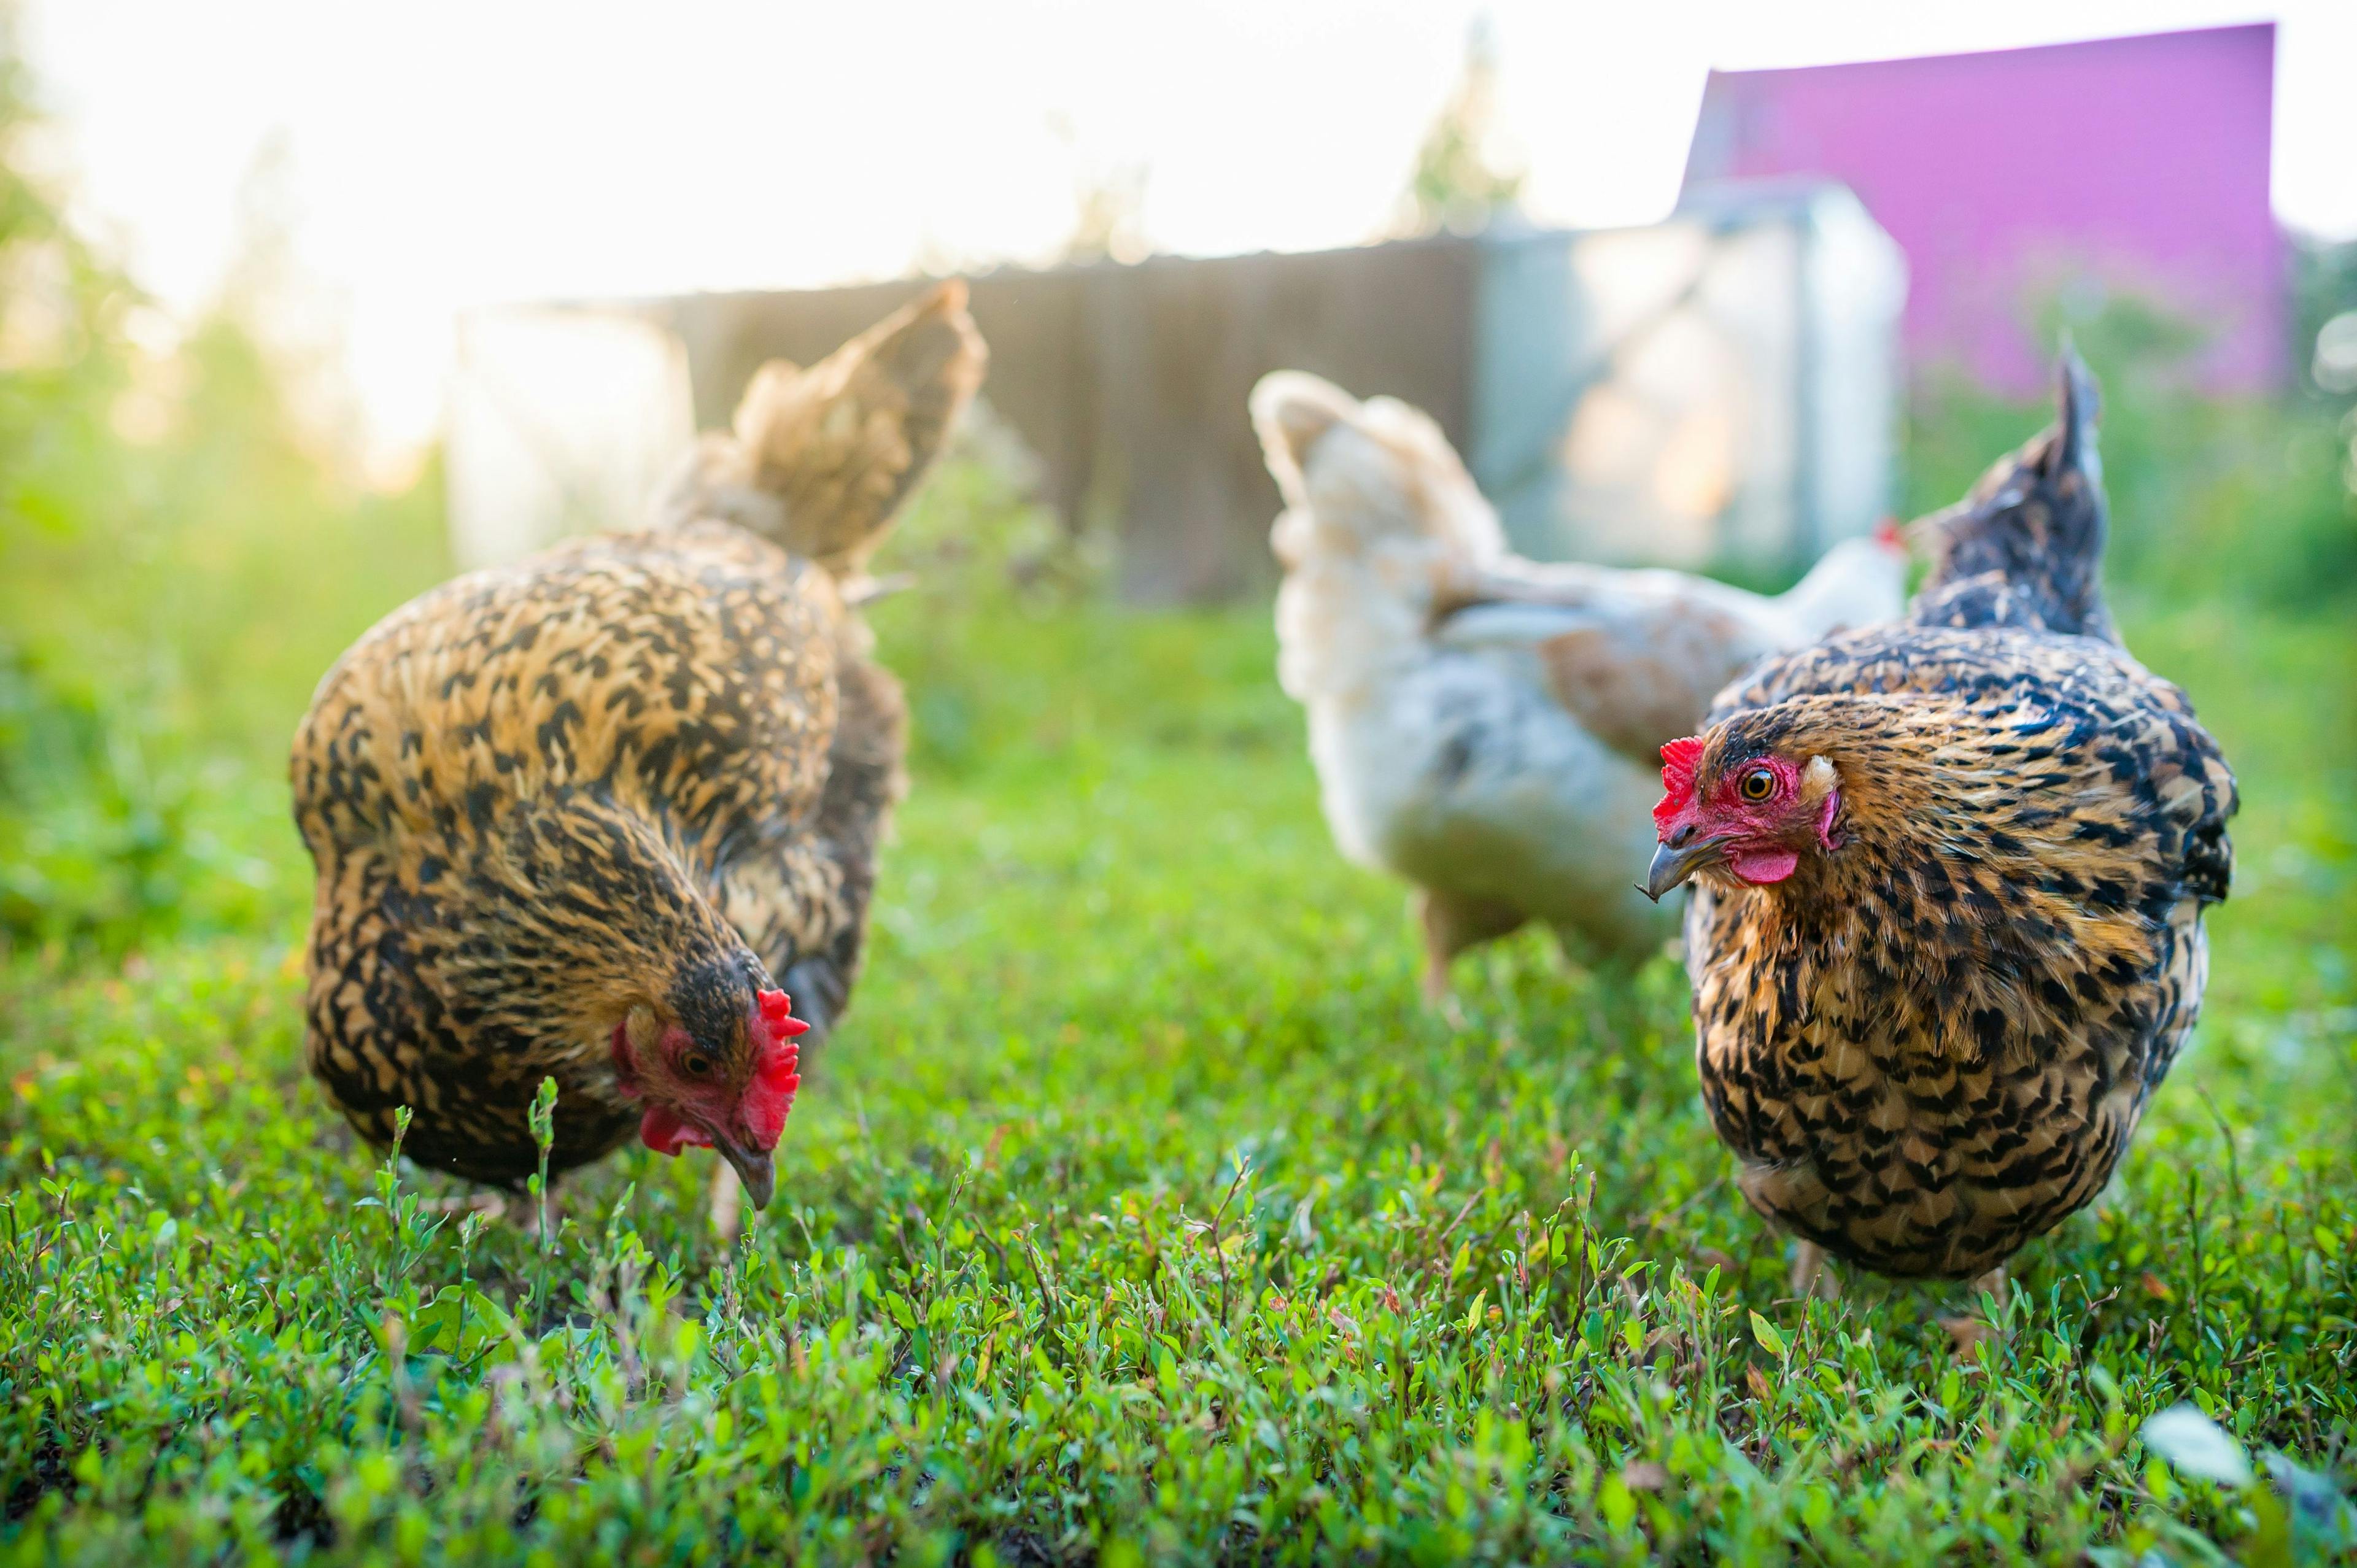 Recognizing and preventing infectious diseases in chickens